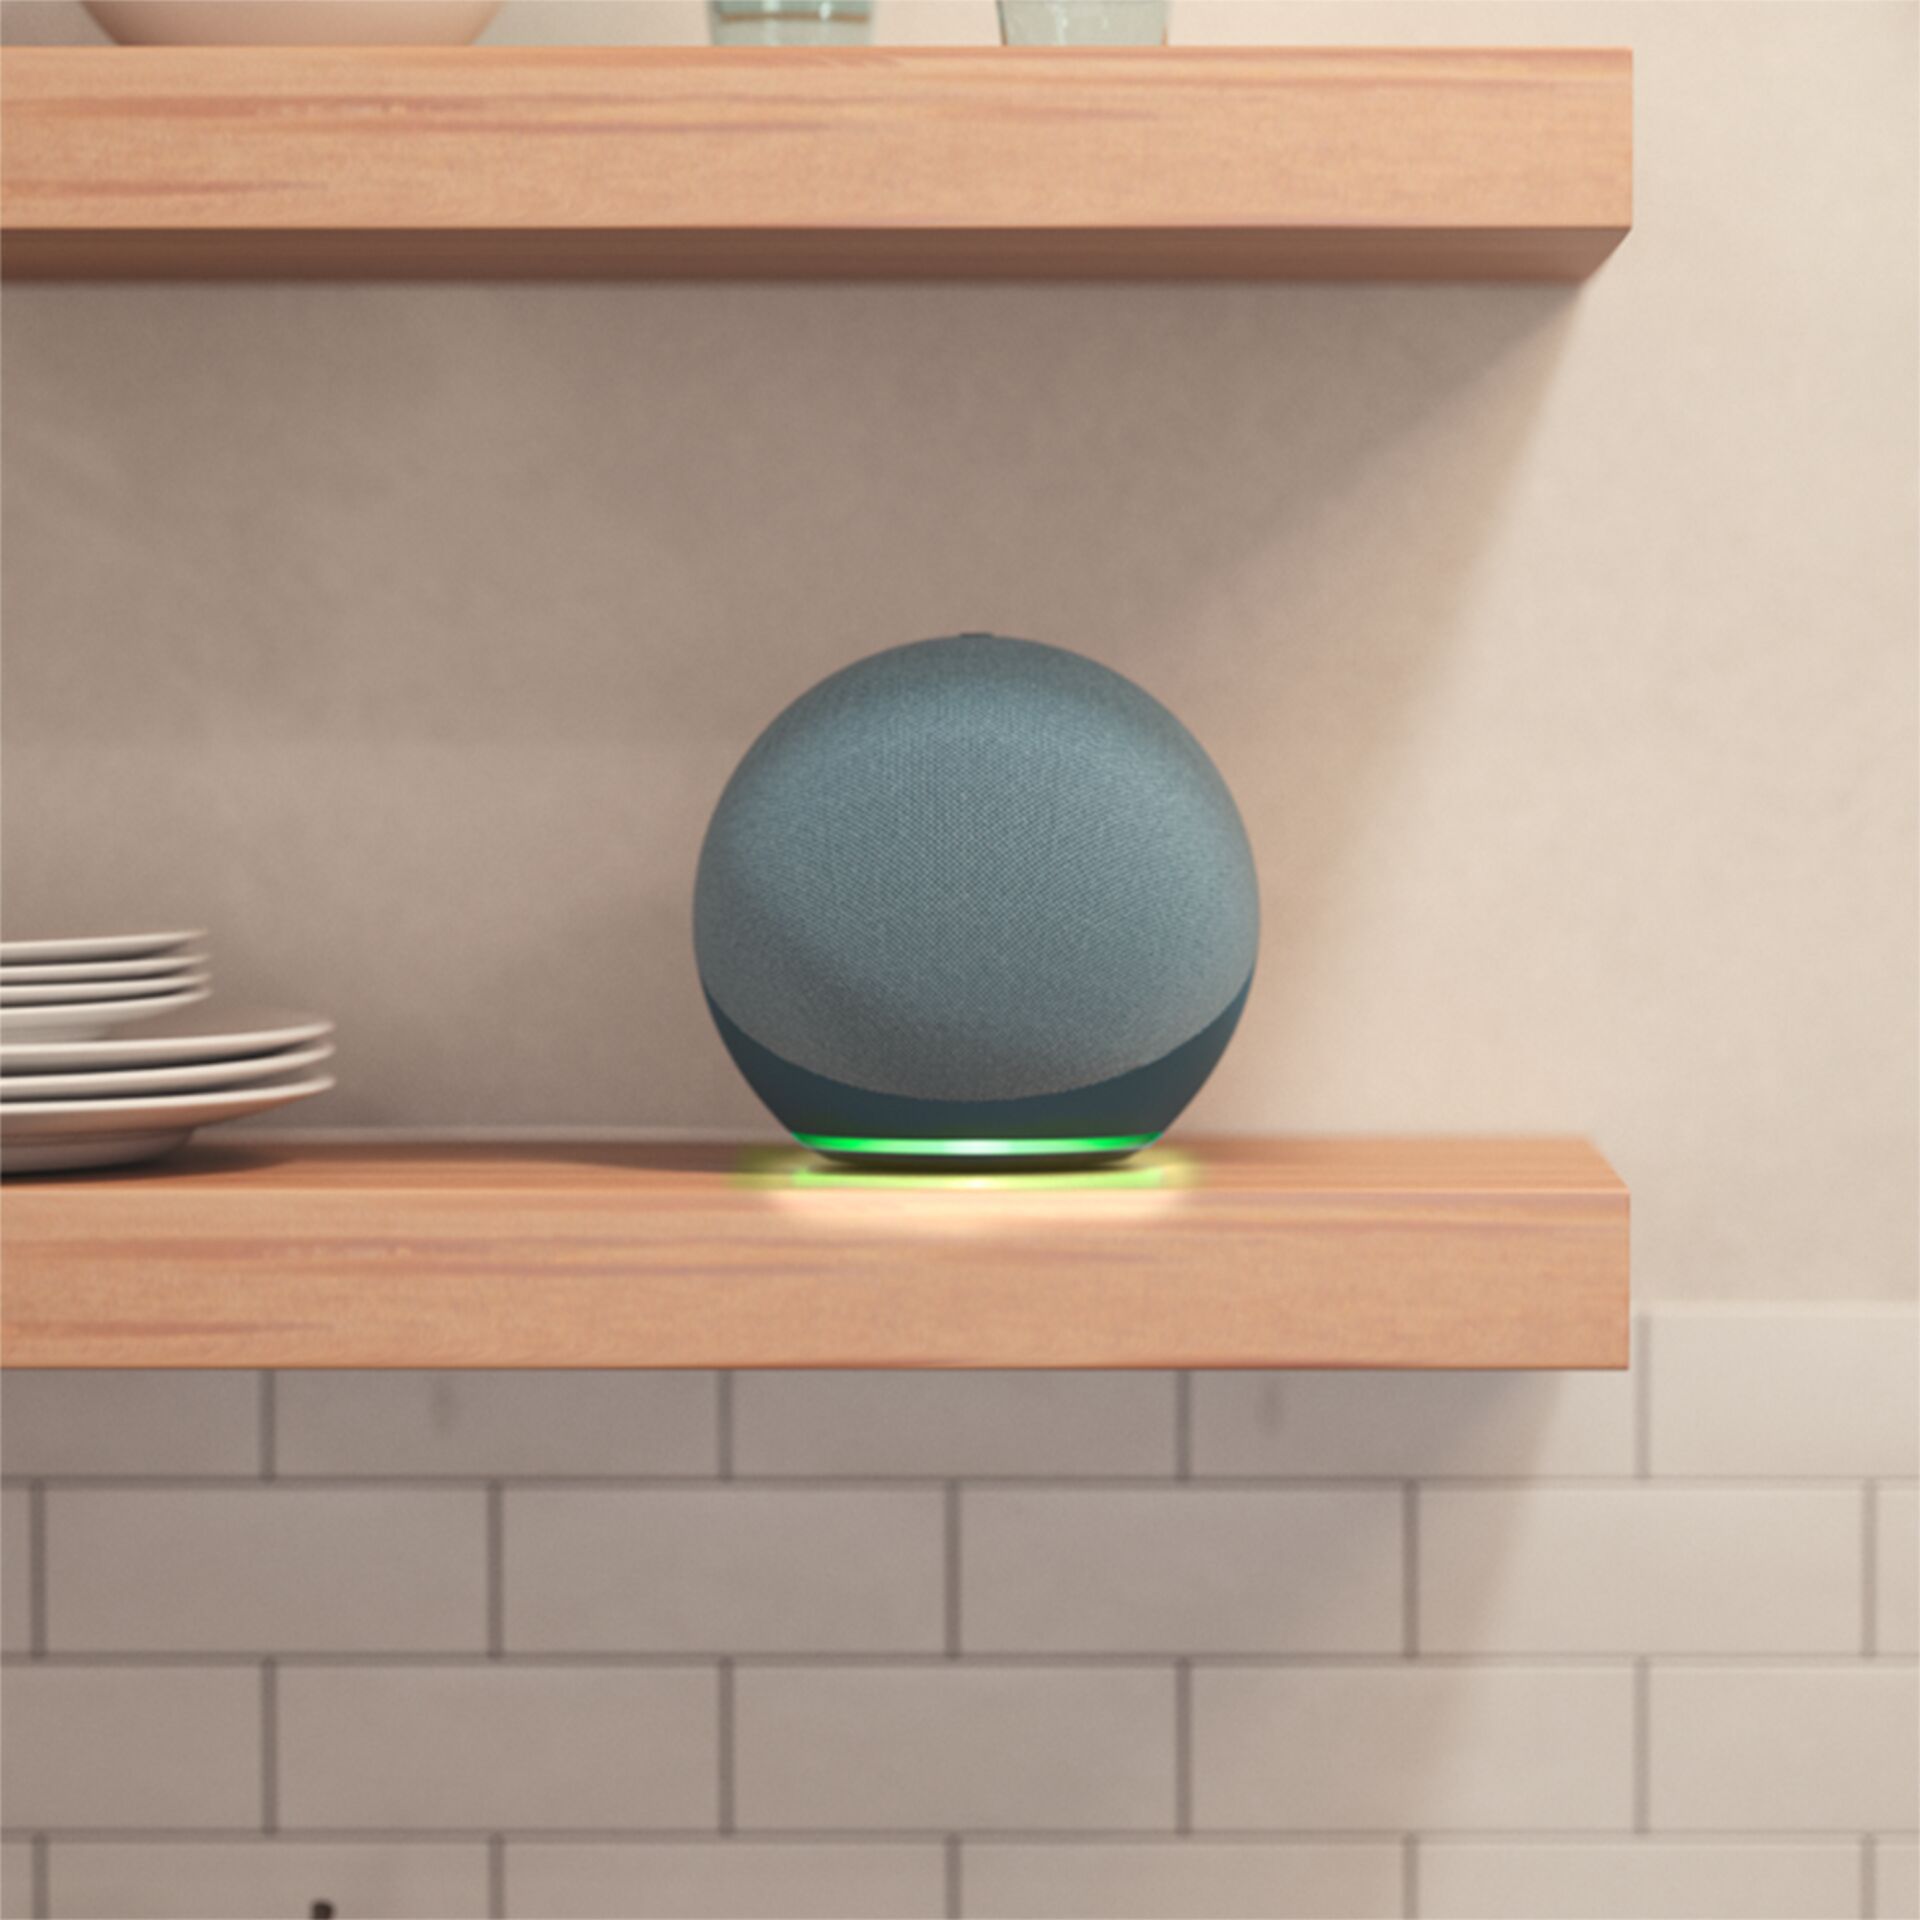 Echo (4th Gen) with Premium Sound, Smart Home Hub, and